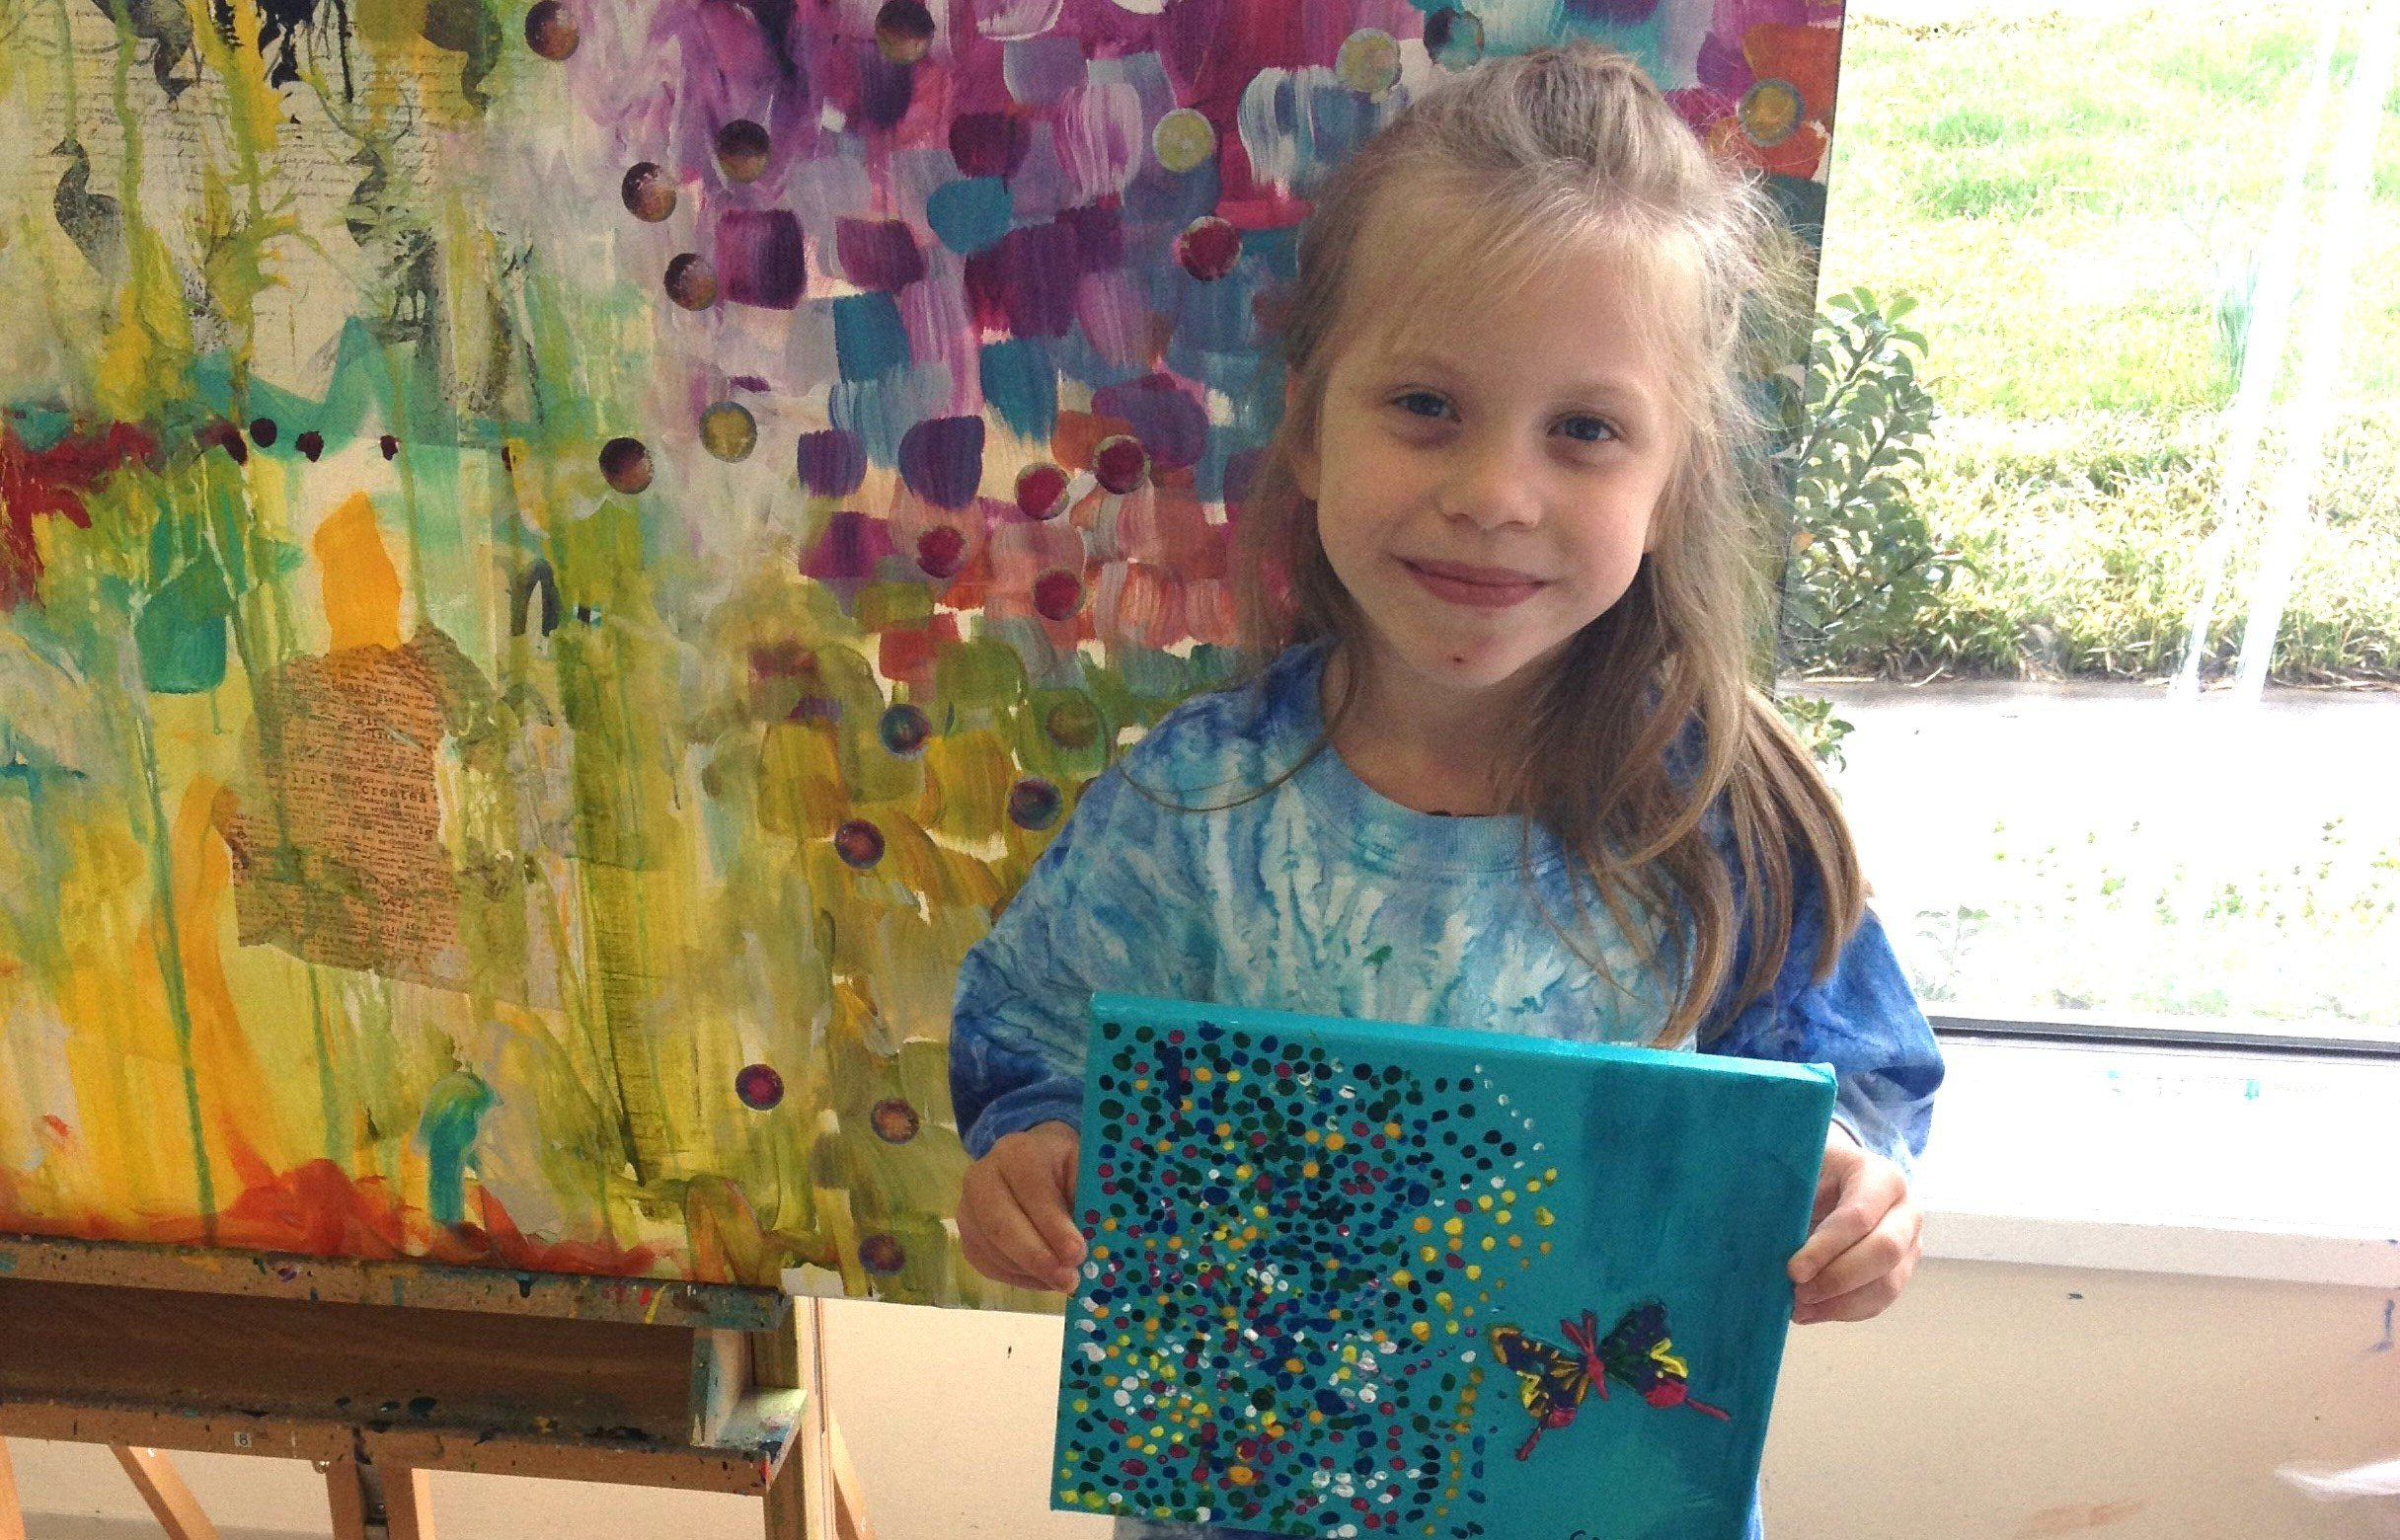 A little girl holds a blue painting with a butterfly and dots while standing in front of a colorful painting.